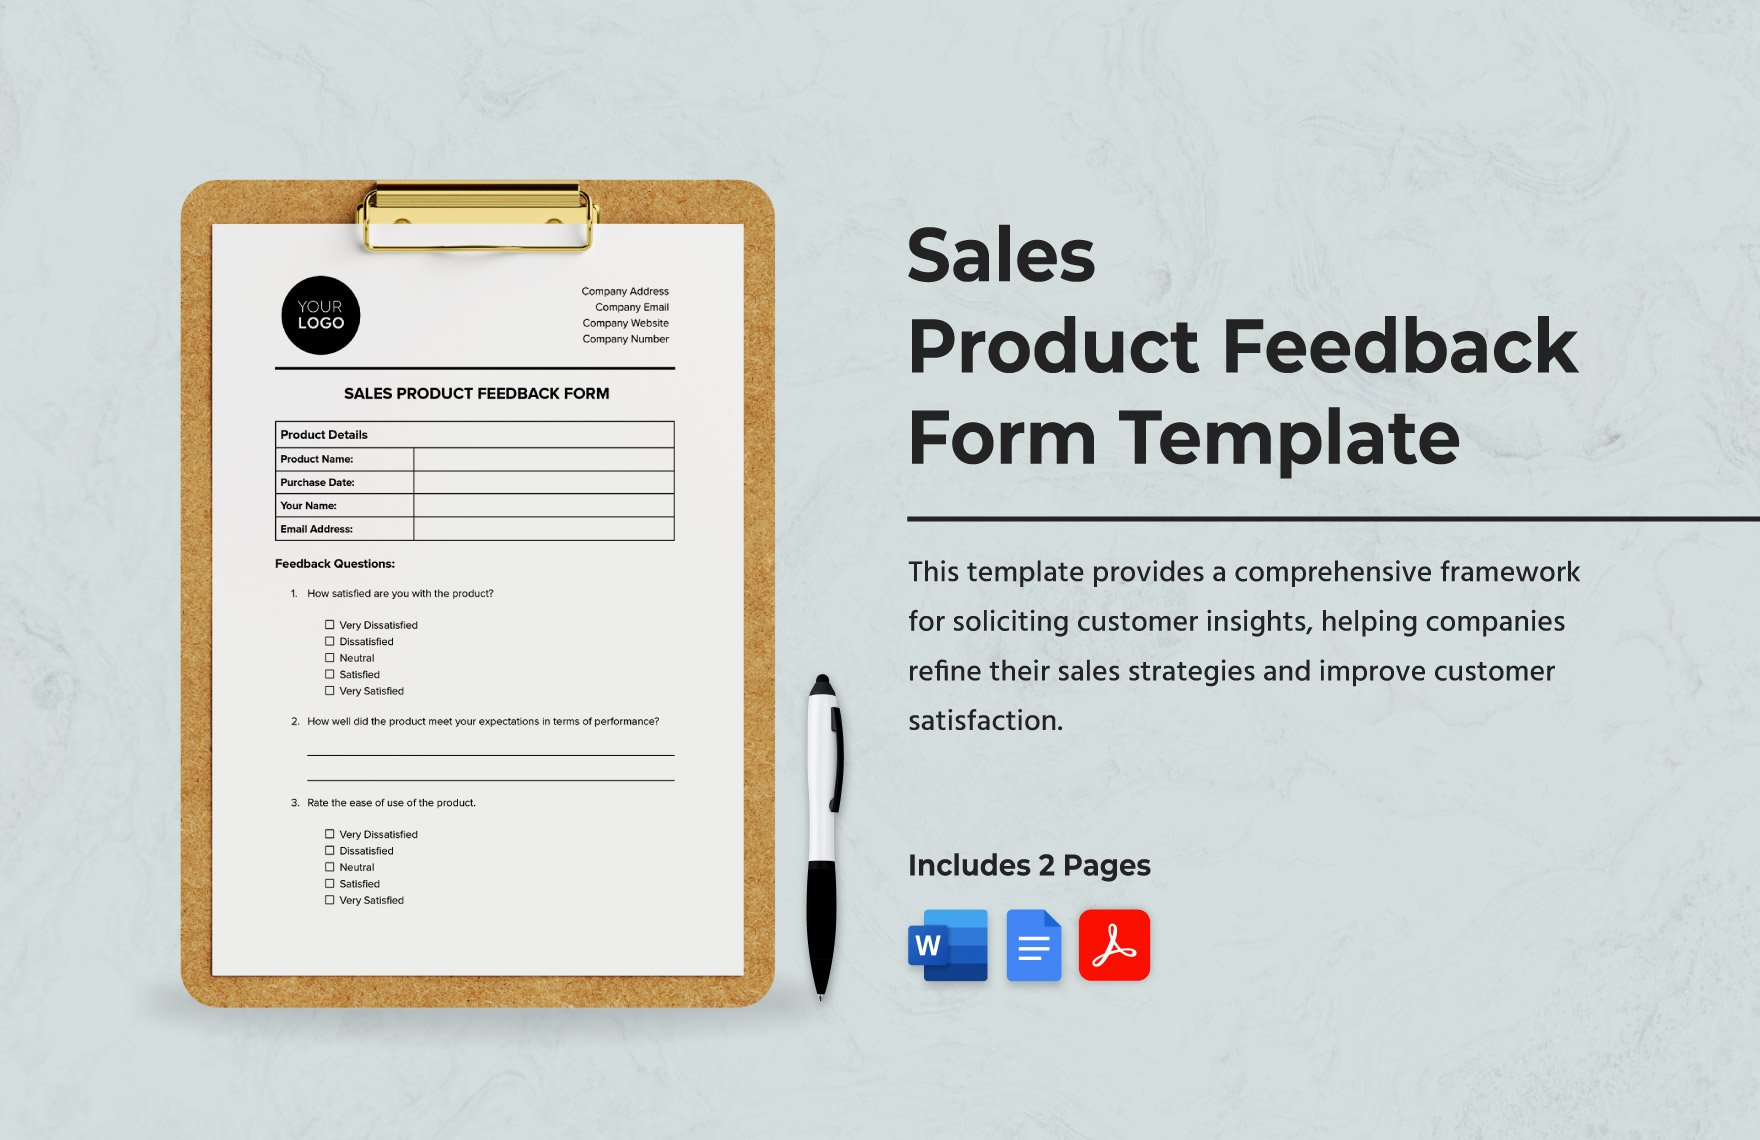 Sales Product Feedback Form Template